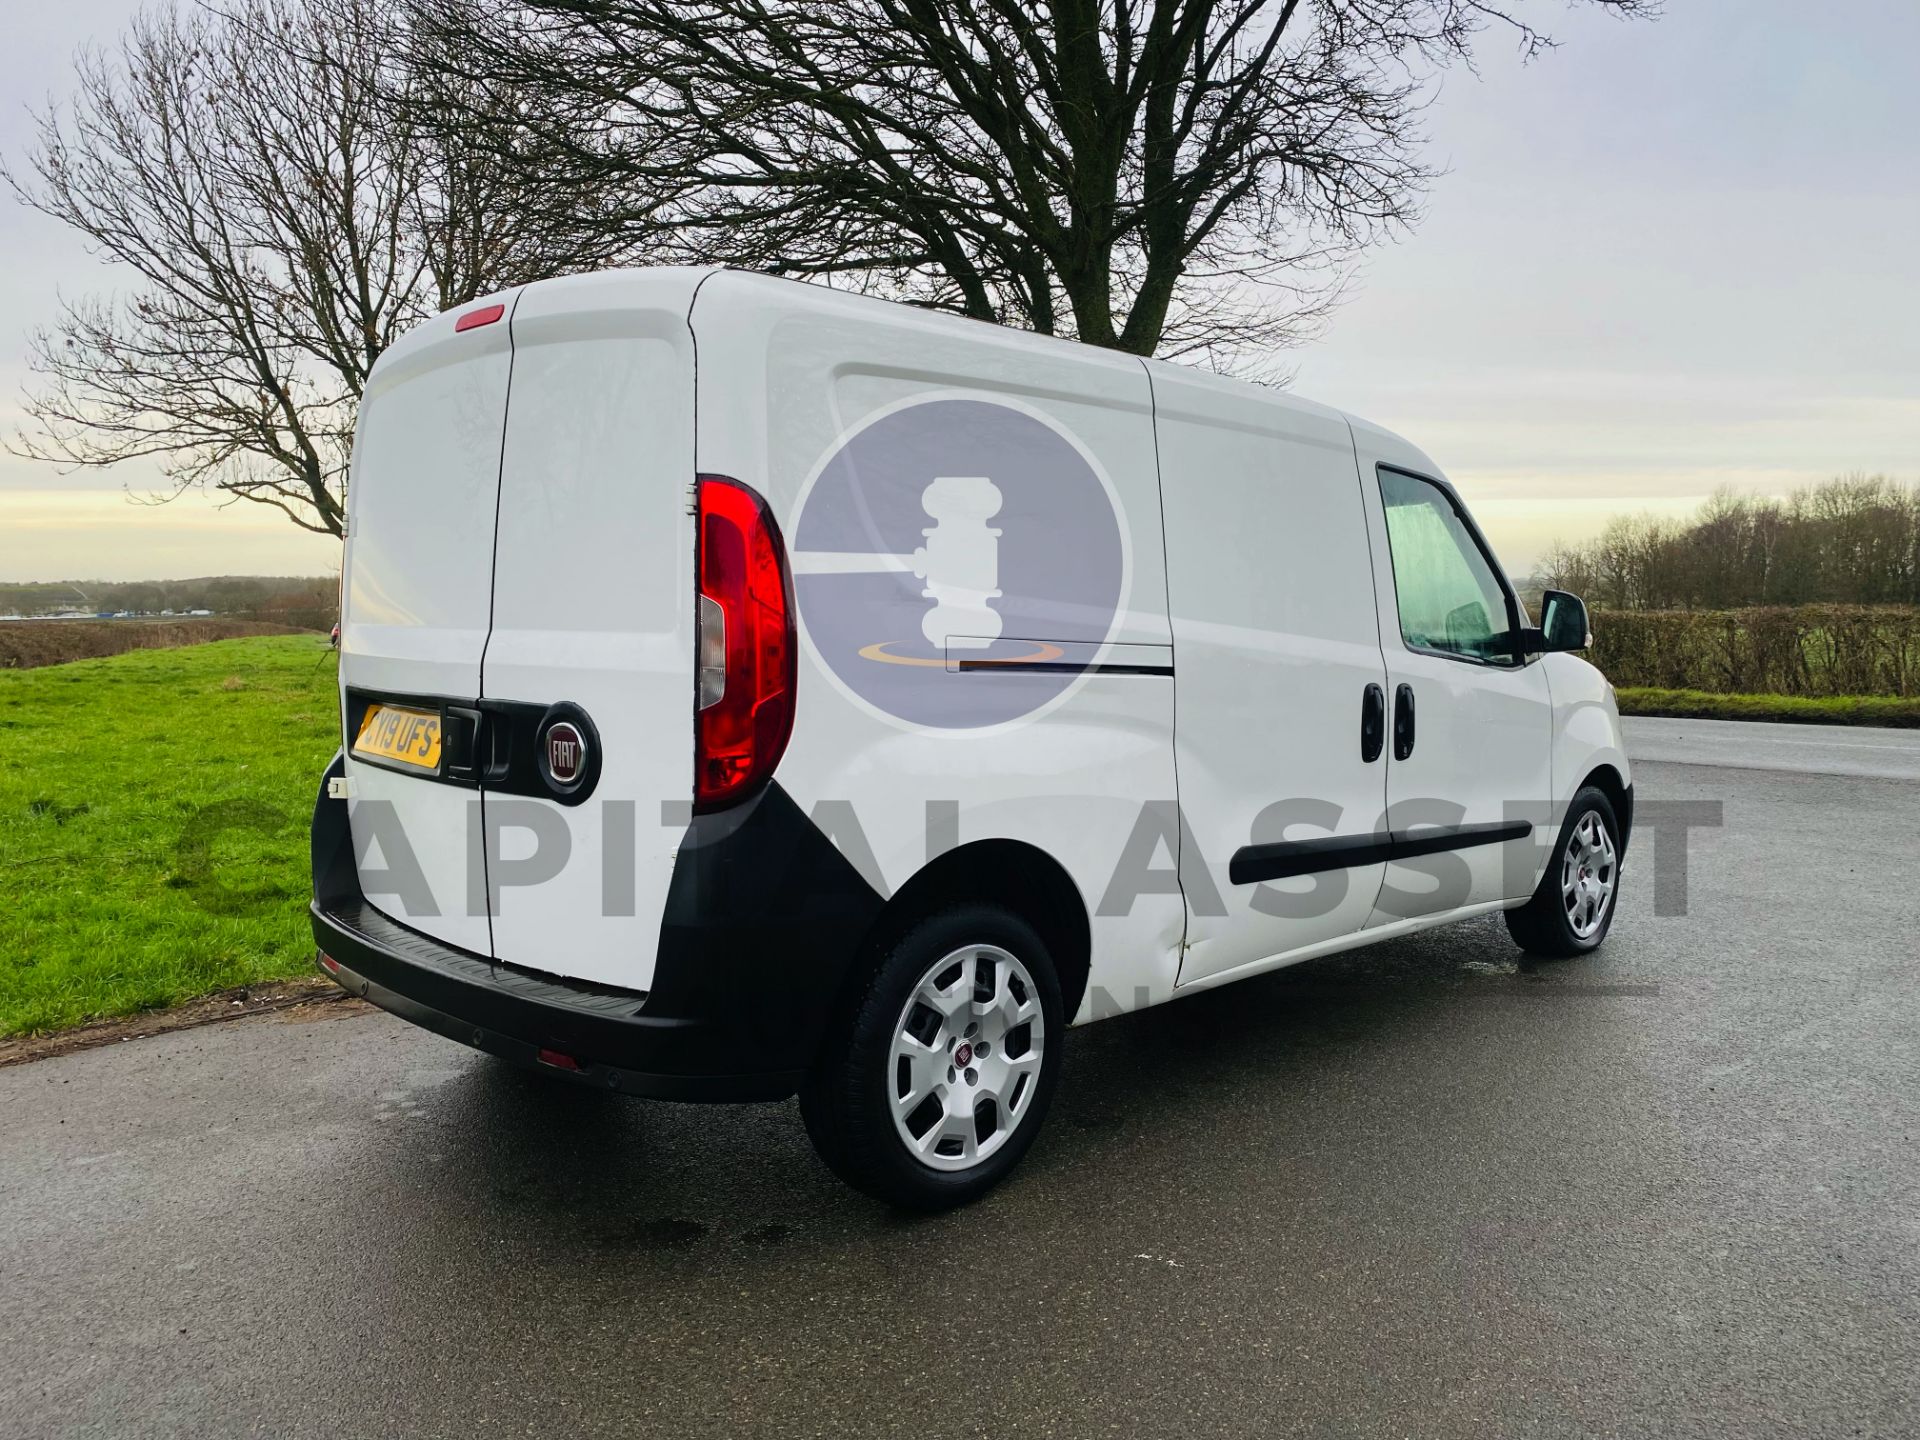 FIAT DOBLO 1.6 MULTIJET LWB "EURO 6" AIR CON - ONLY 46793 MILES! - 19 REG - (NEW SHAPE) - - Image 9 of 23